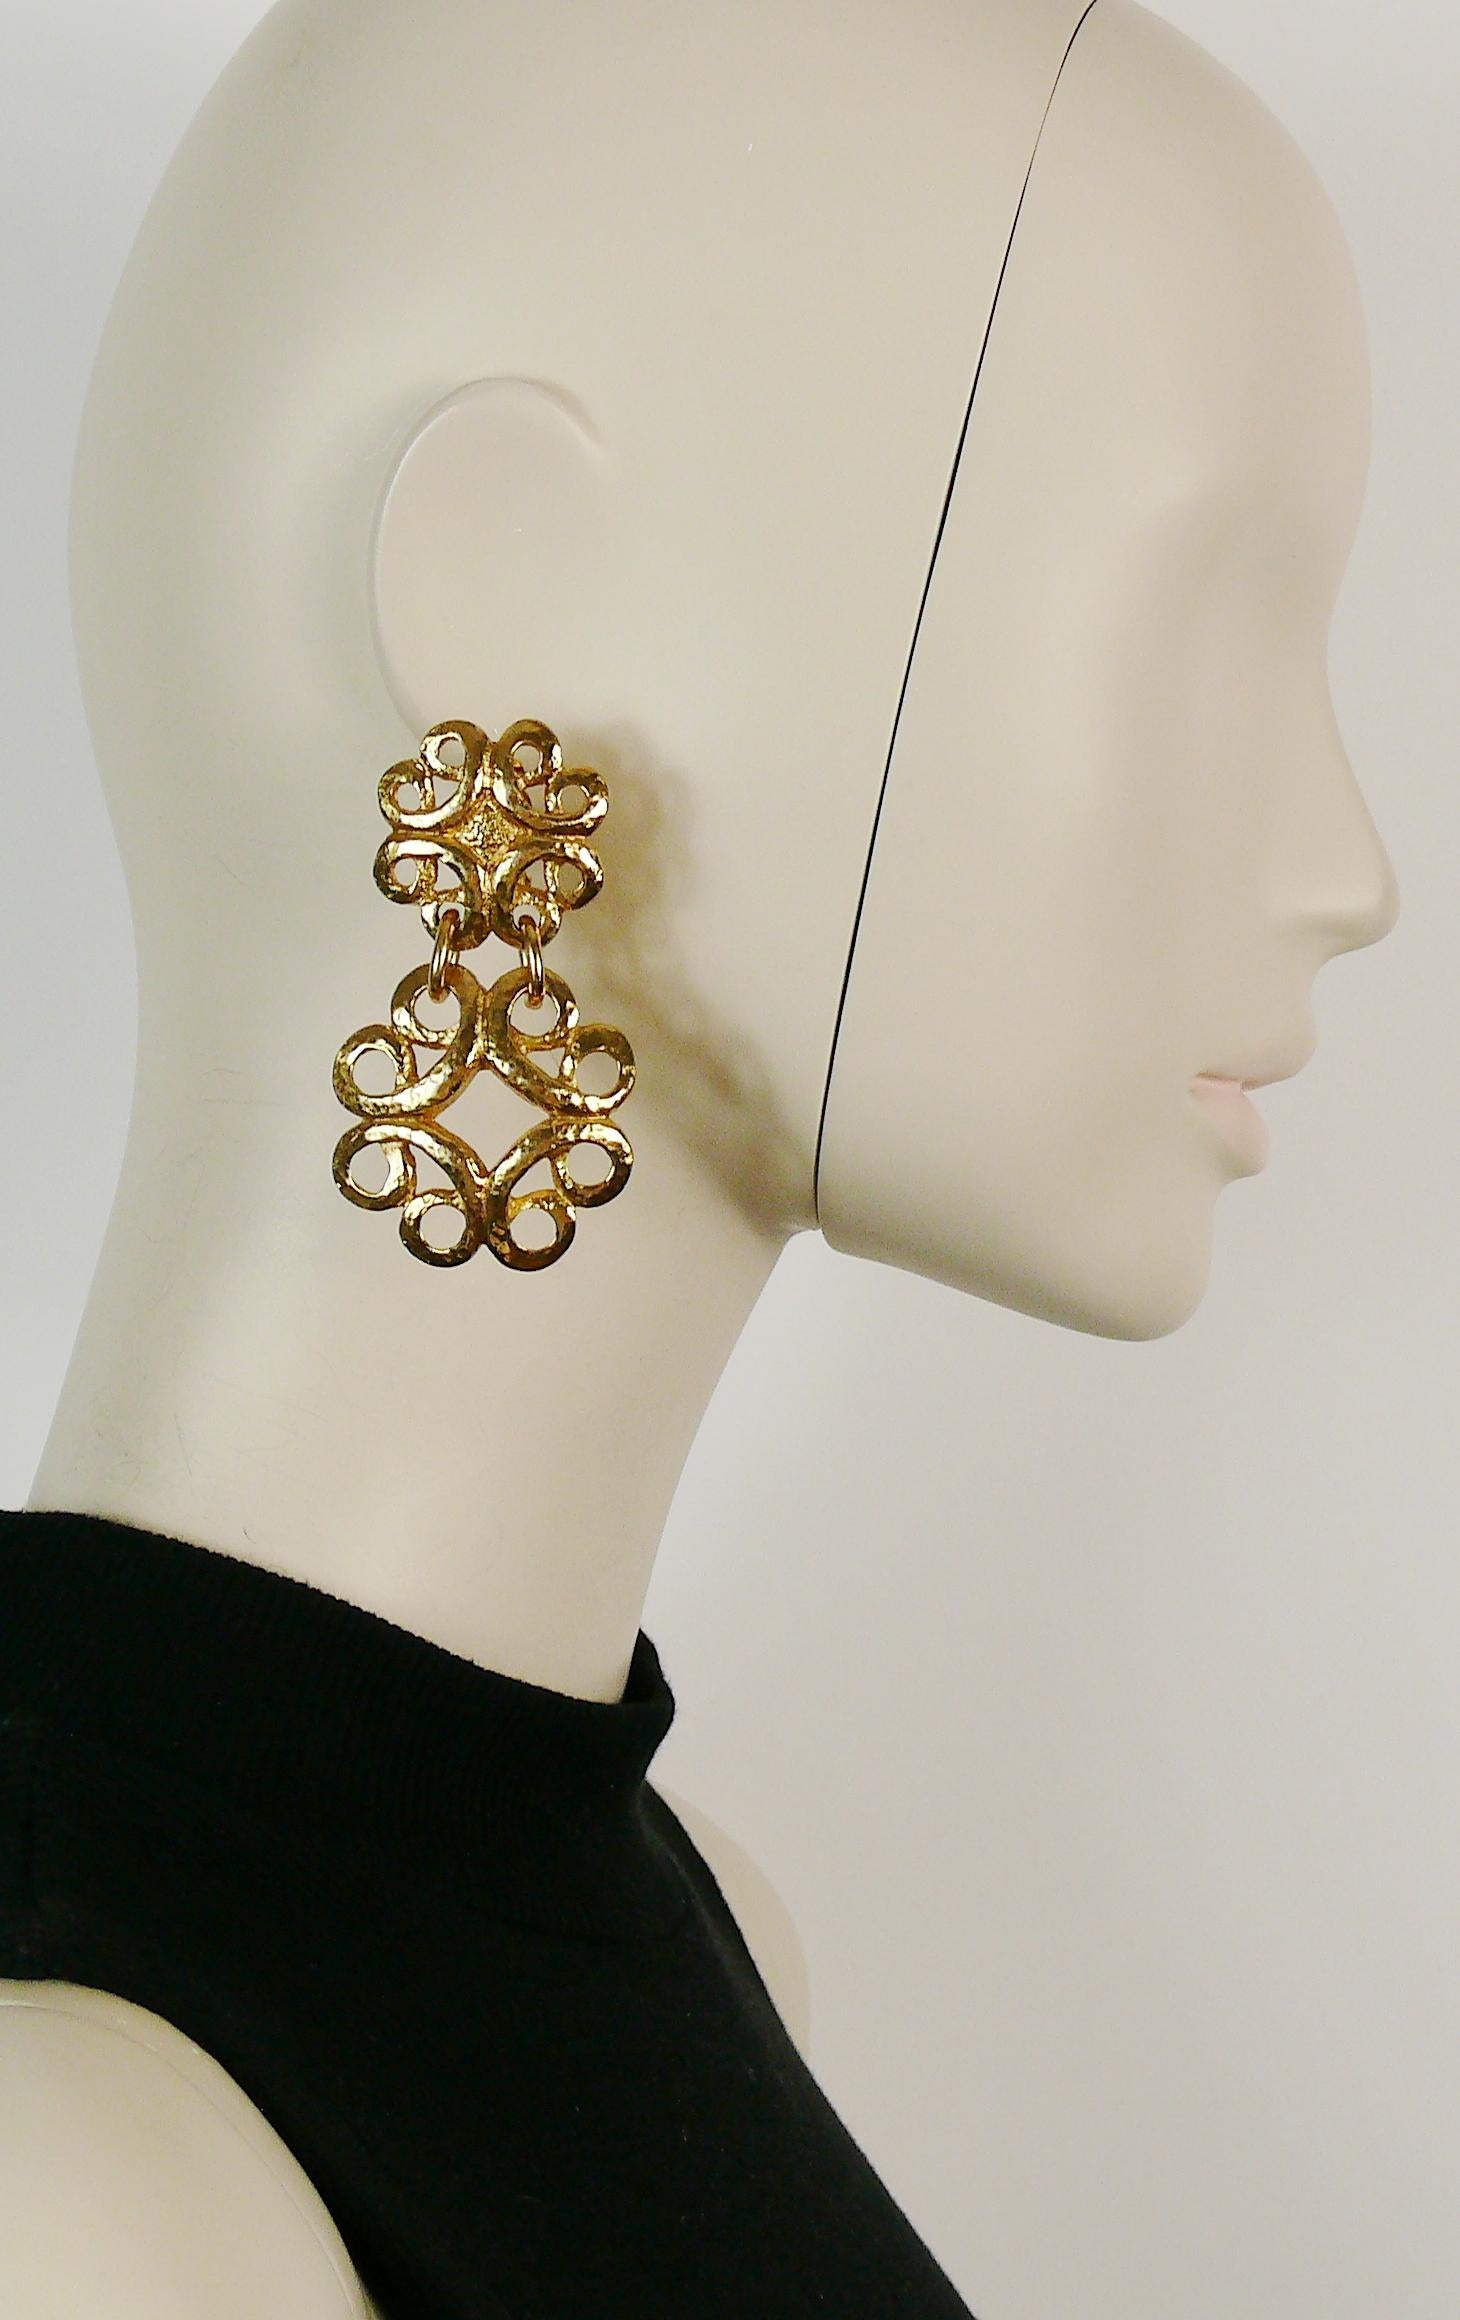 YVES SAINT LAURENT vintage chunky gold toned swirl pattern textured dandling earrings (clip-on).

Marked YSL.
Made in France.

Indicative measurements : height approx. 7 cm (2.76 inches) / max. width approx. 4 cm (1.57 inches).

NOTES
- This is a